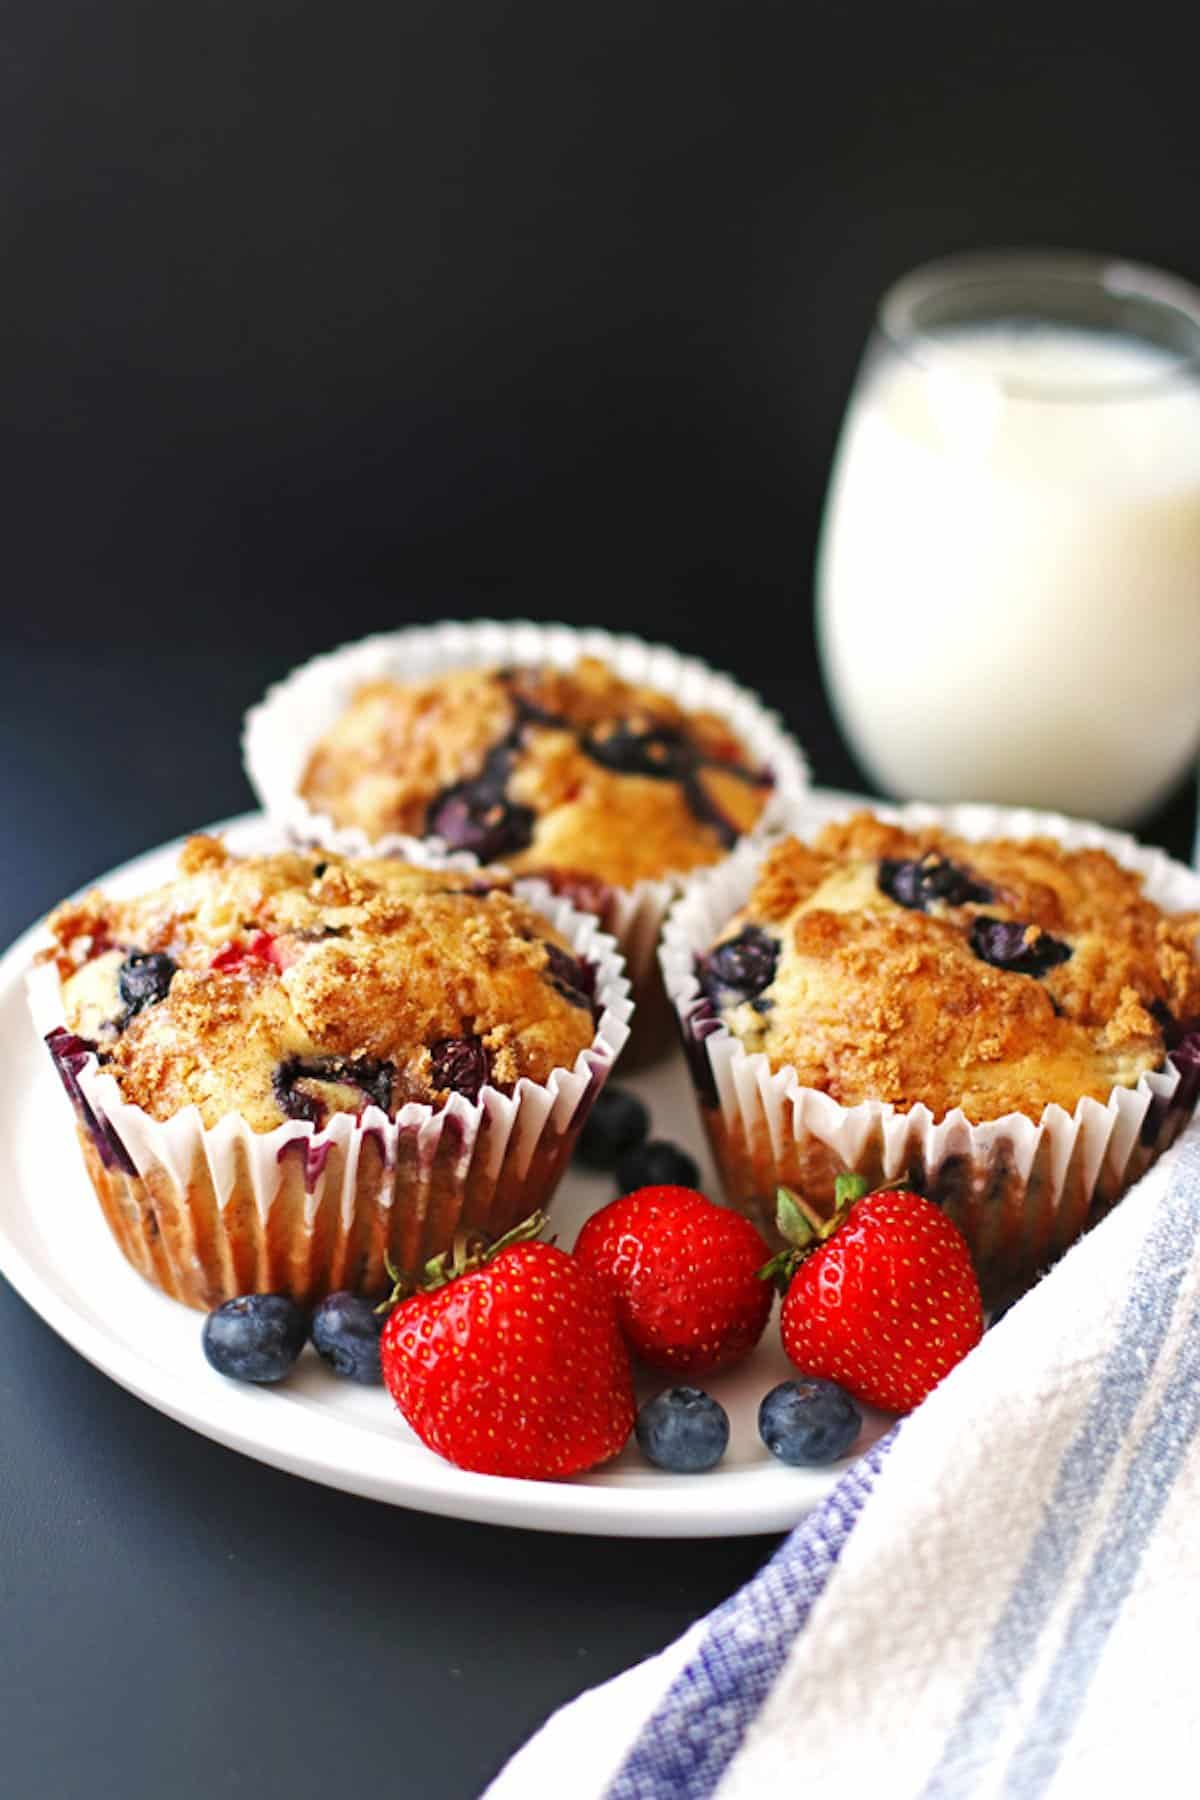 Three fruit explosion jumbo muffins on a plate with strawberries and blueberries.